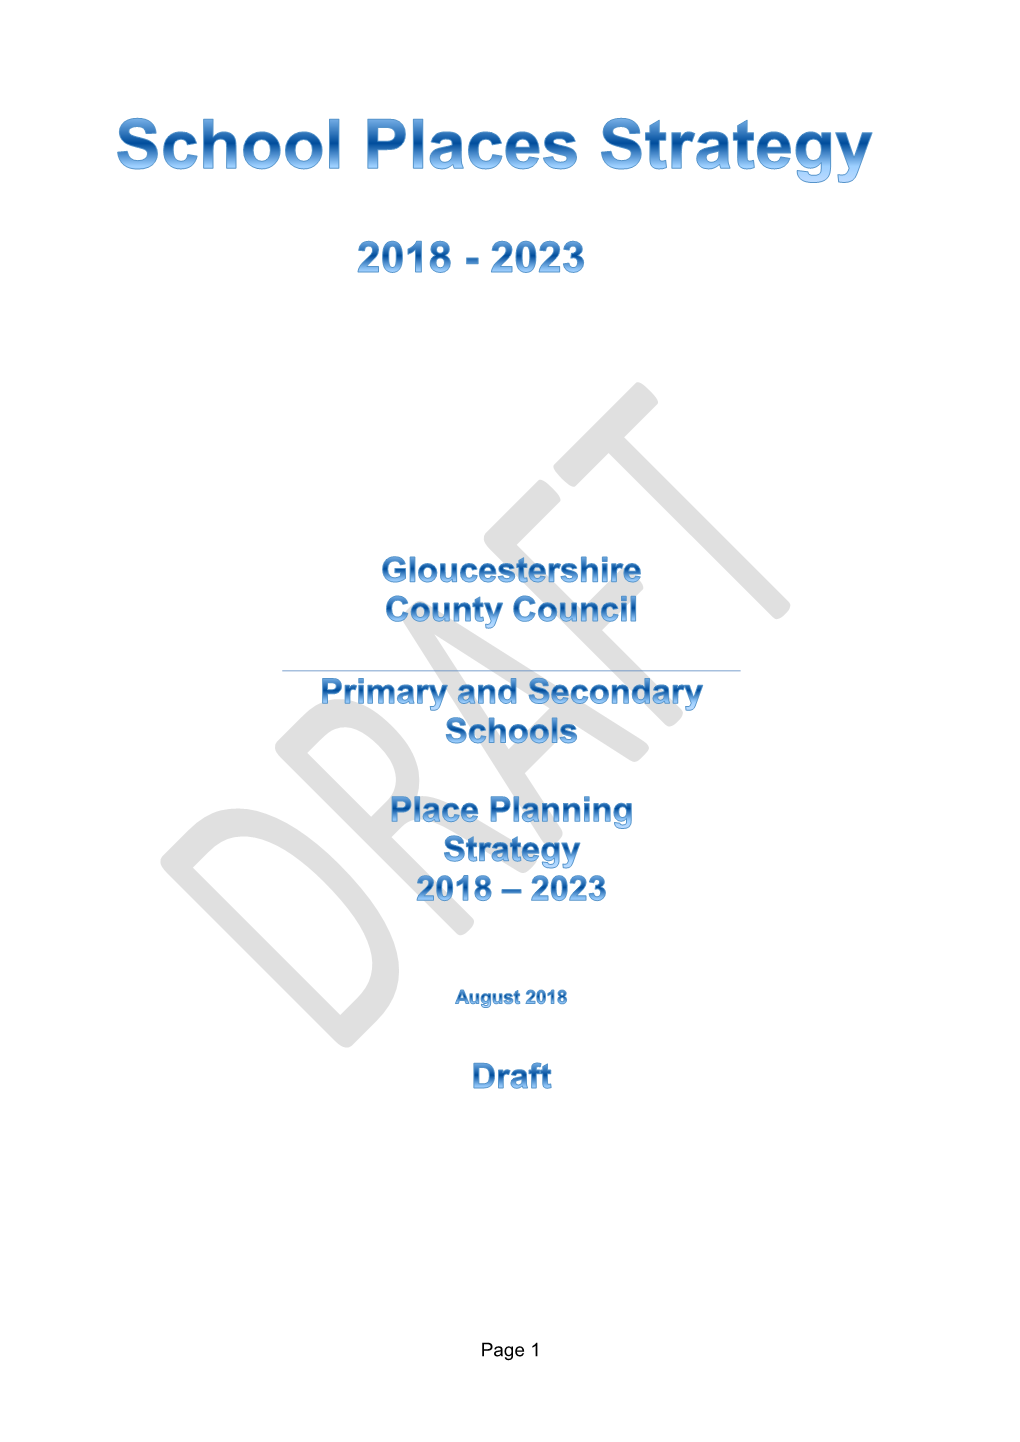 Copy of the Draft Gloucestershire School Places Strategy 2018-2023